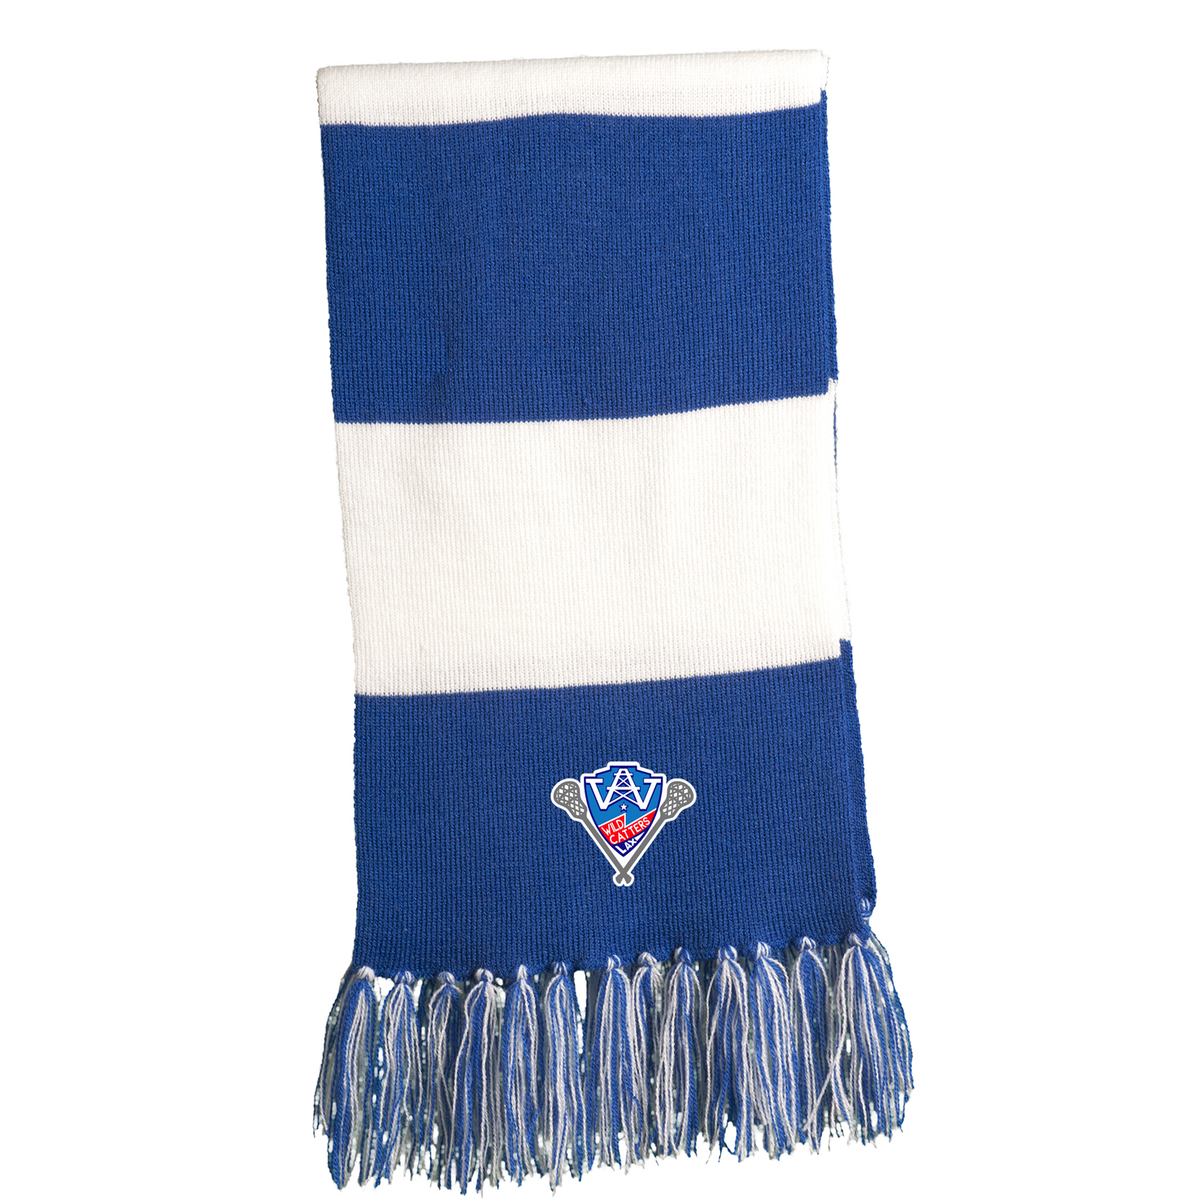 Wildcatters Lax Team Scarf